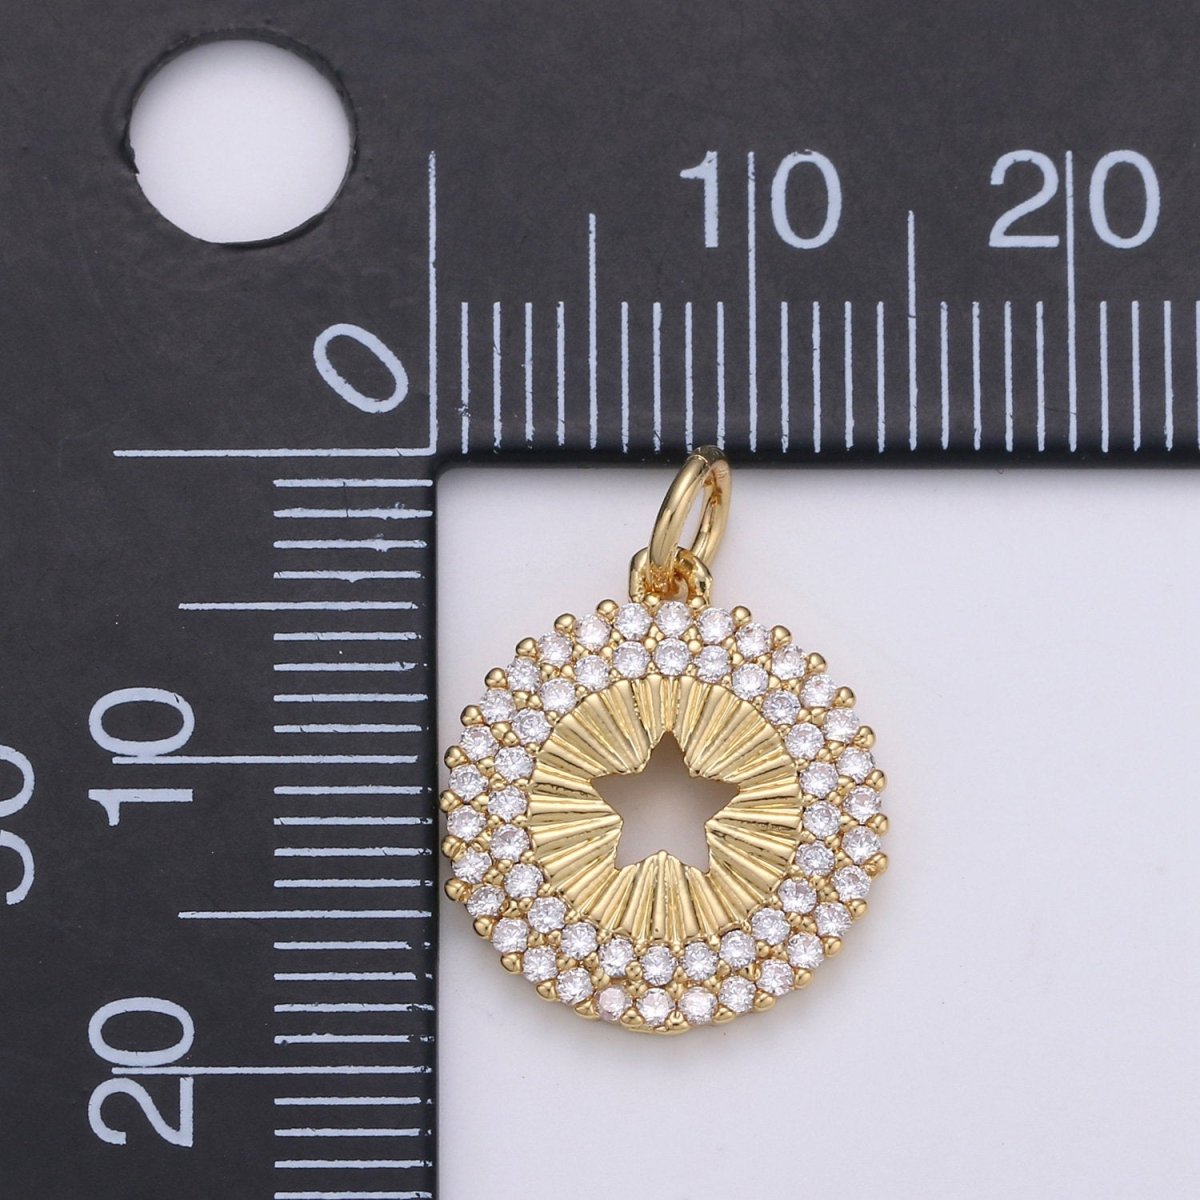 14mm 24K Gold and Silver Round Star Charm - Round Star Charm, Micro Pave Star Charm, Twinkle Star Charm, 24k Gold Filled Charm D-576 D-577 - DLUXCA